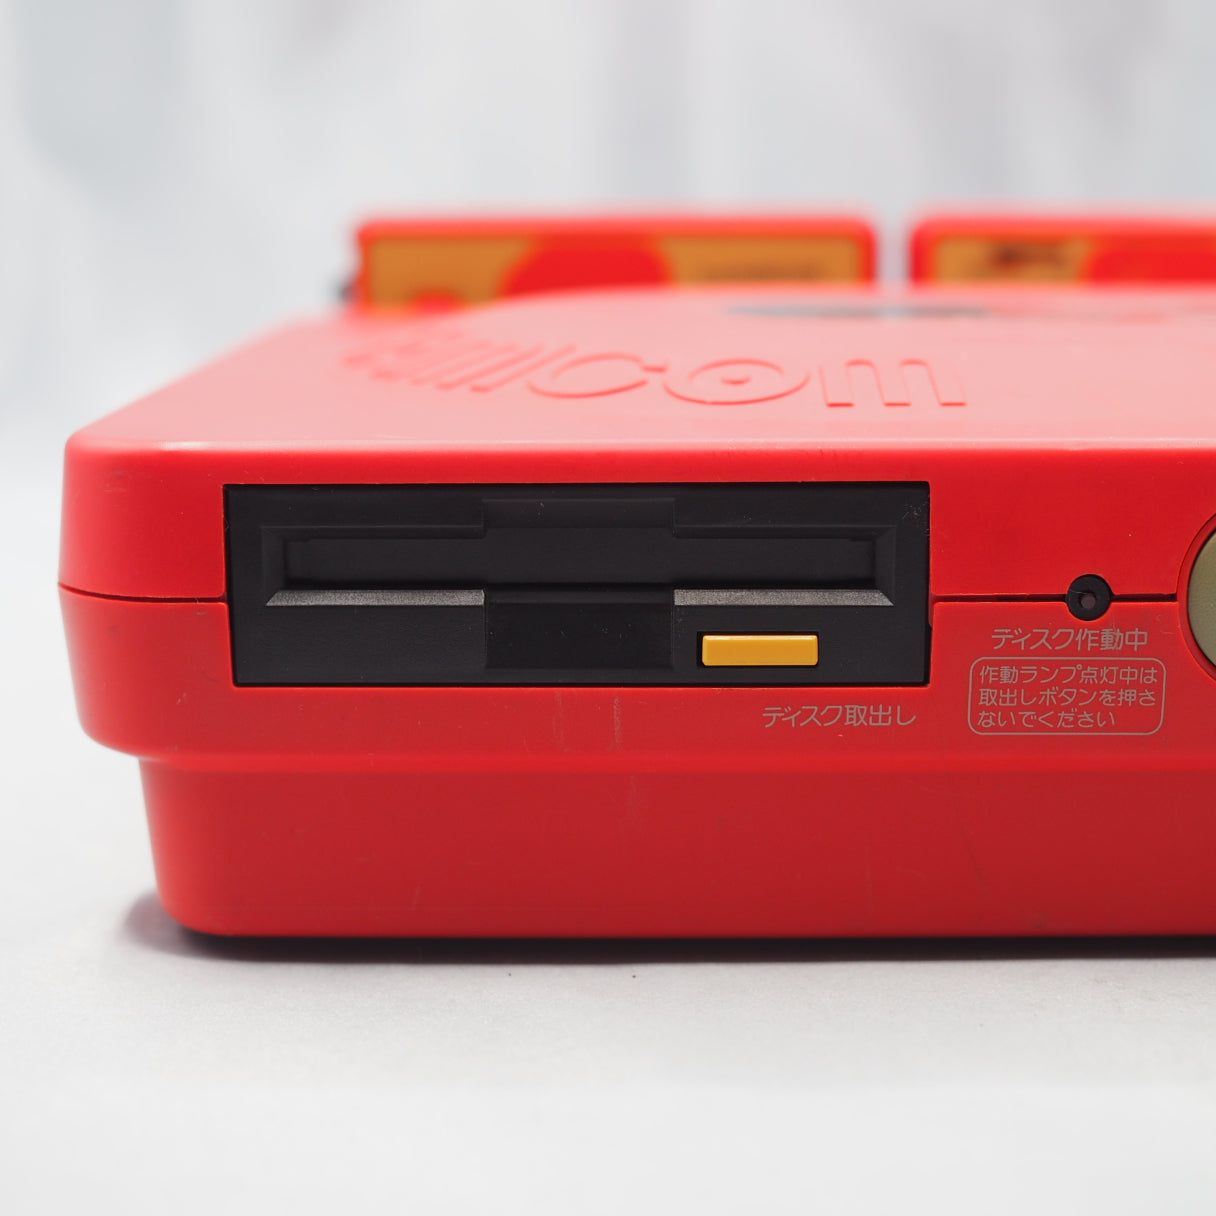 Twin Famicom AN-500R [New Rubber Belt replaced]